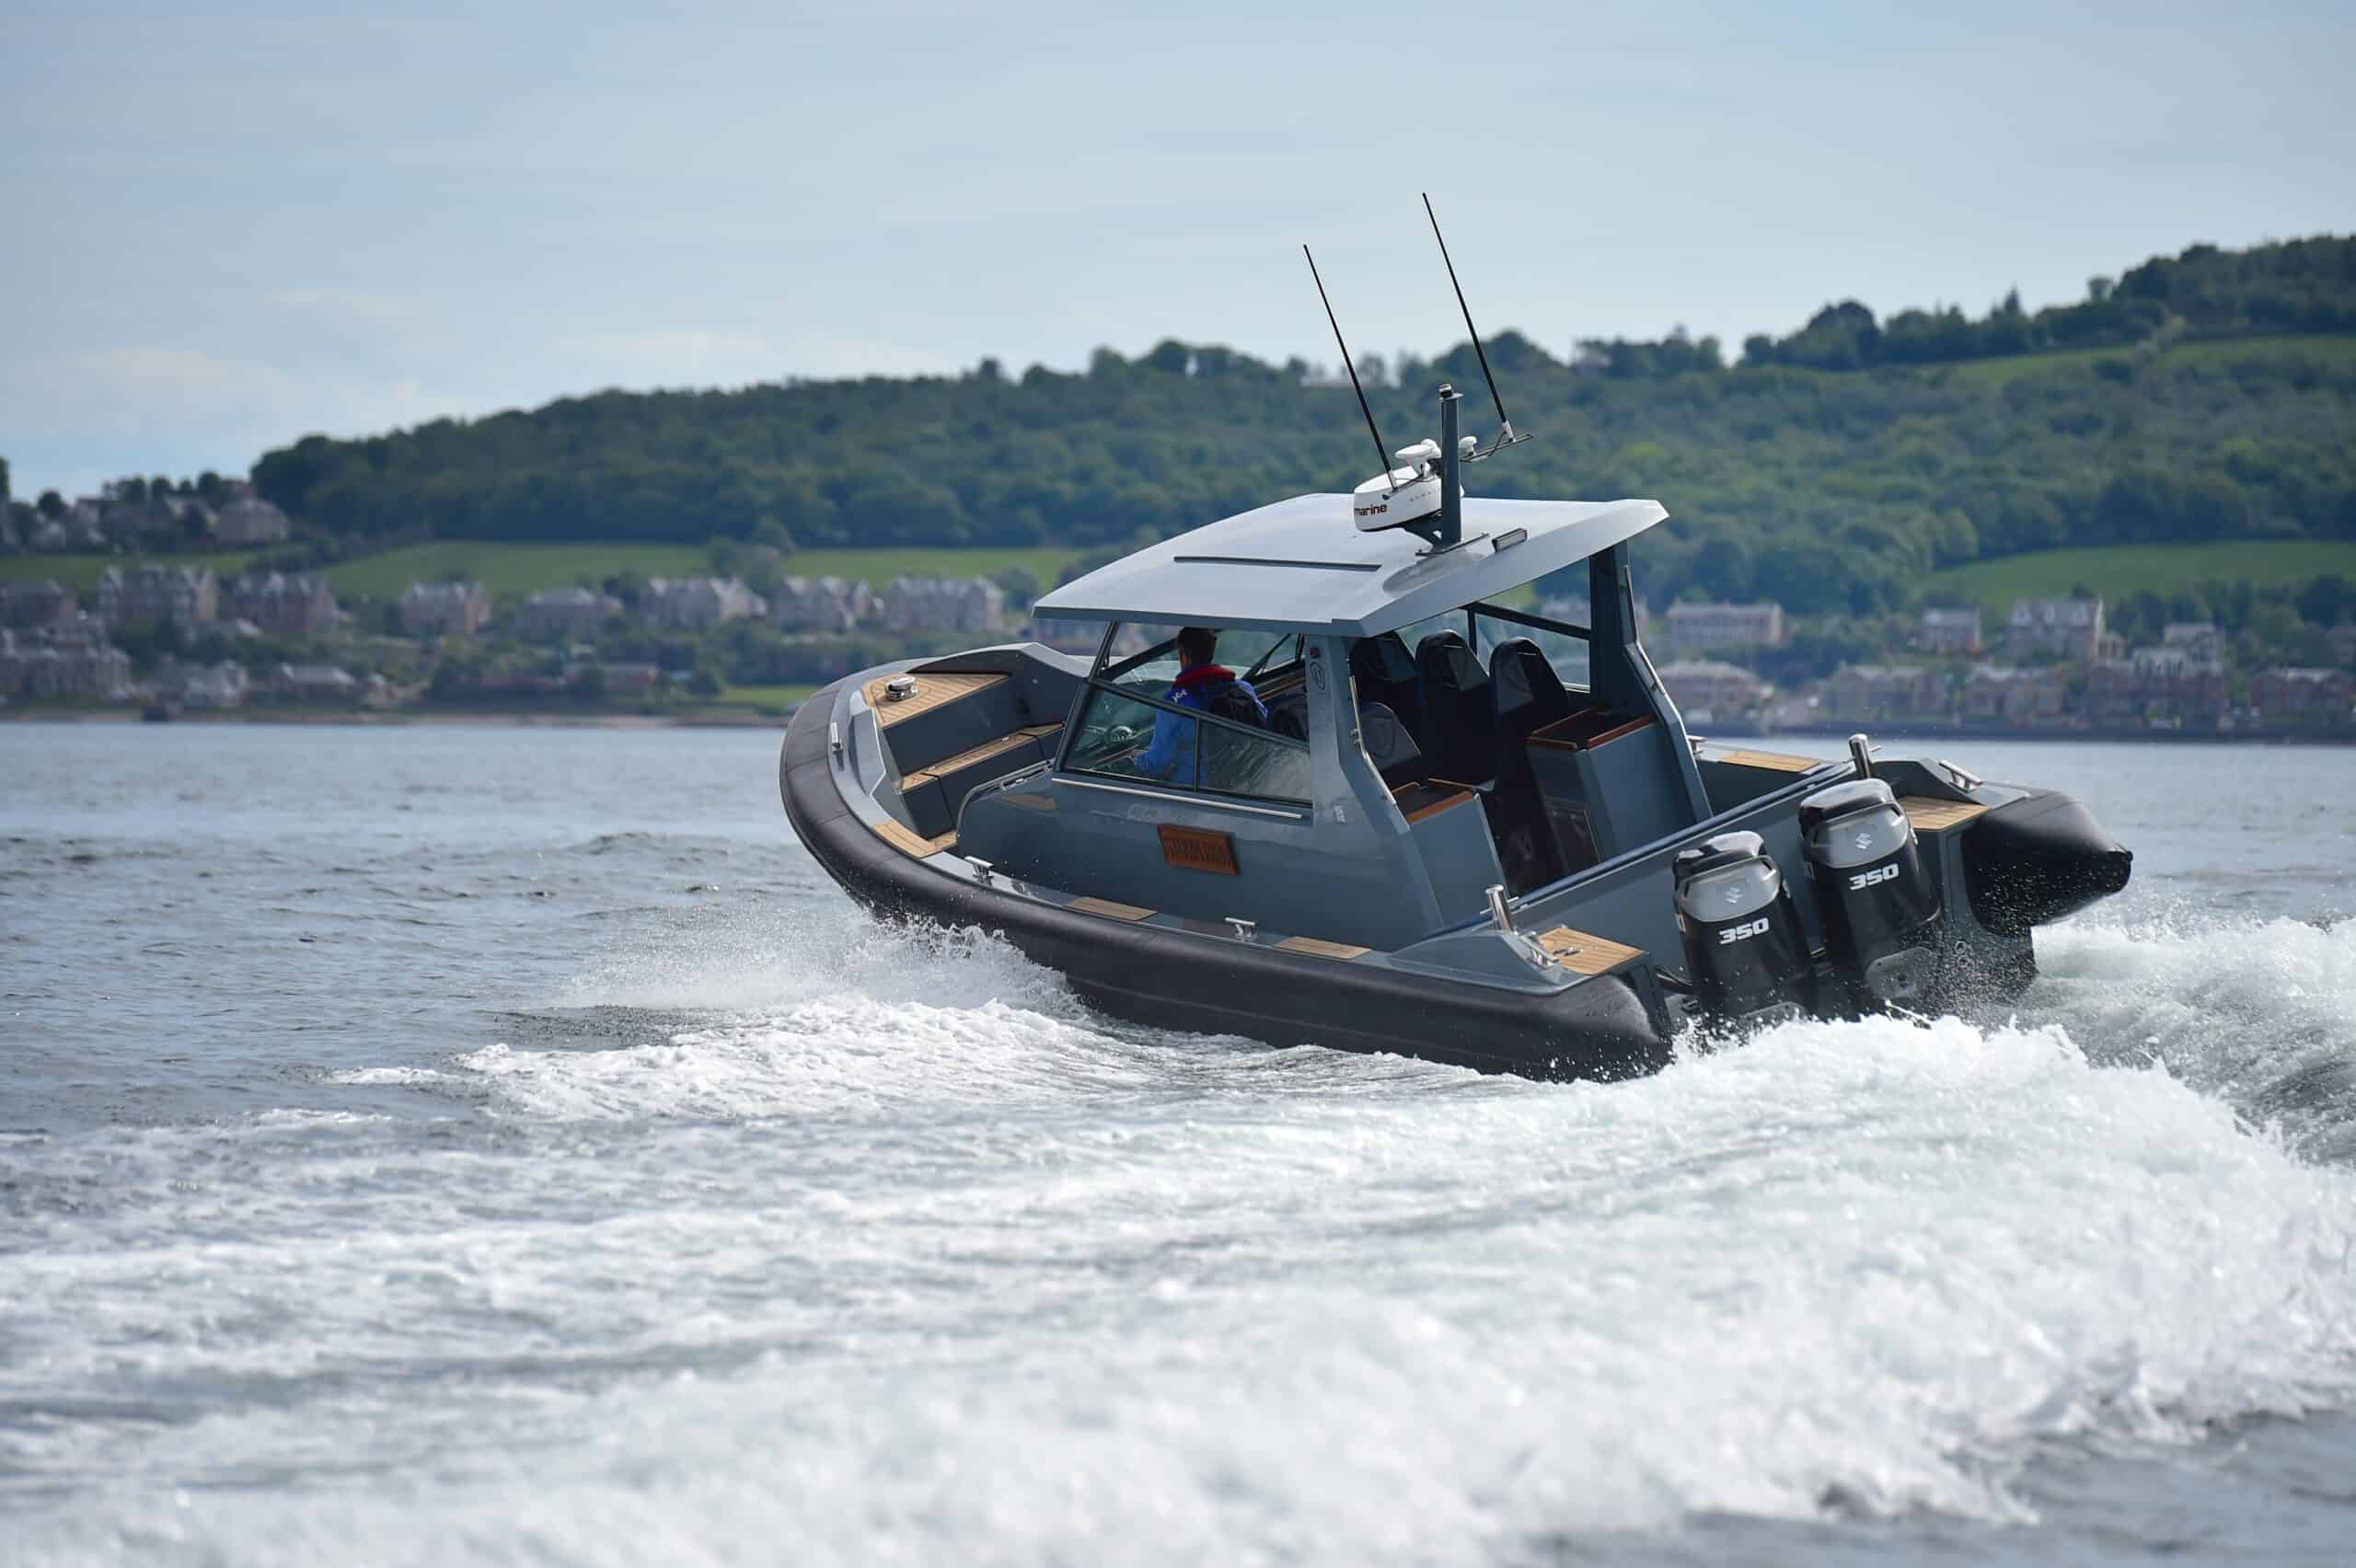 World launch of Two New High-Performance Craft From Ultimate Boats